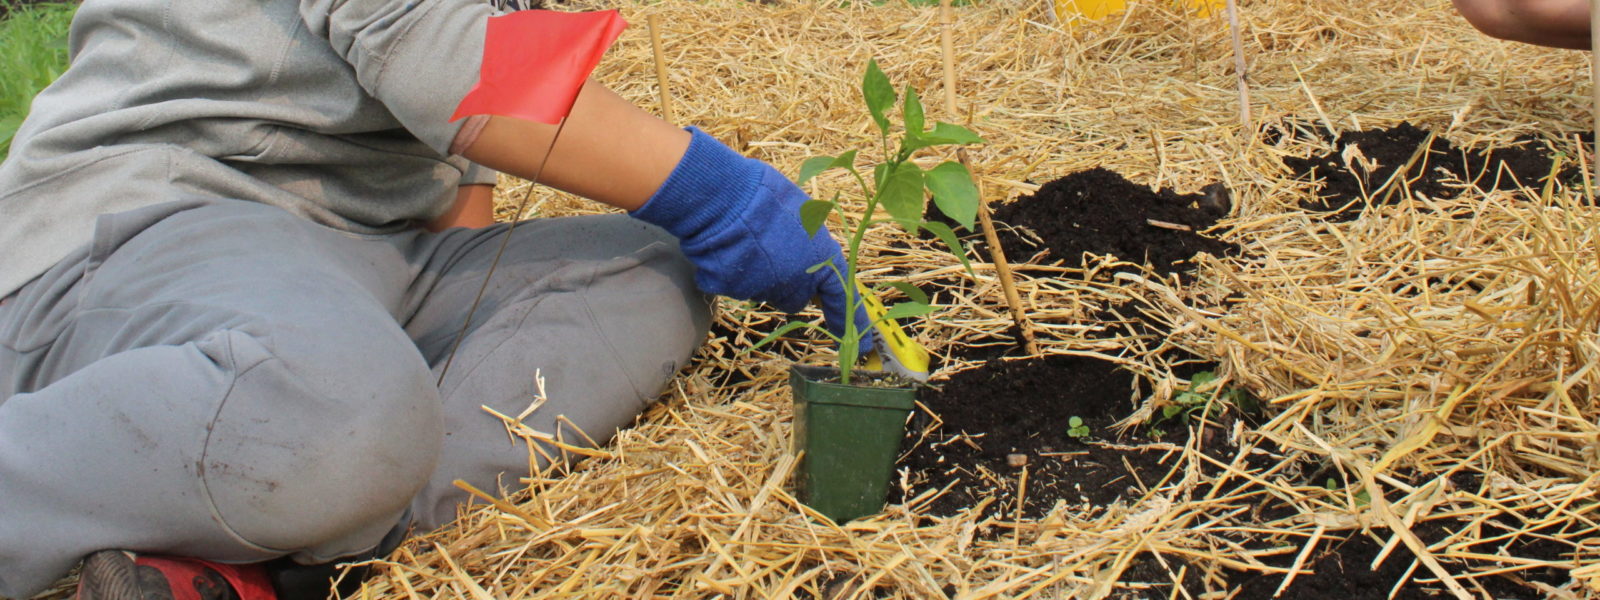 A child digging in a garden